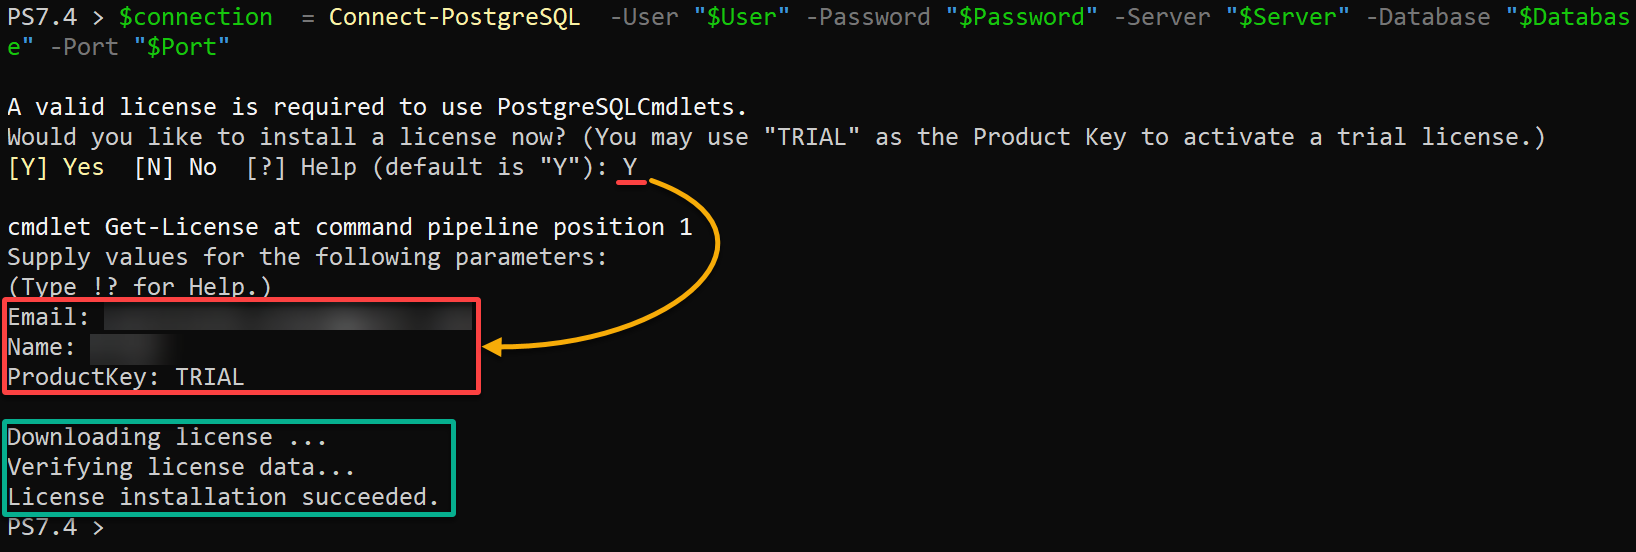 Connecting to the PostgreSQL server and activating a trial